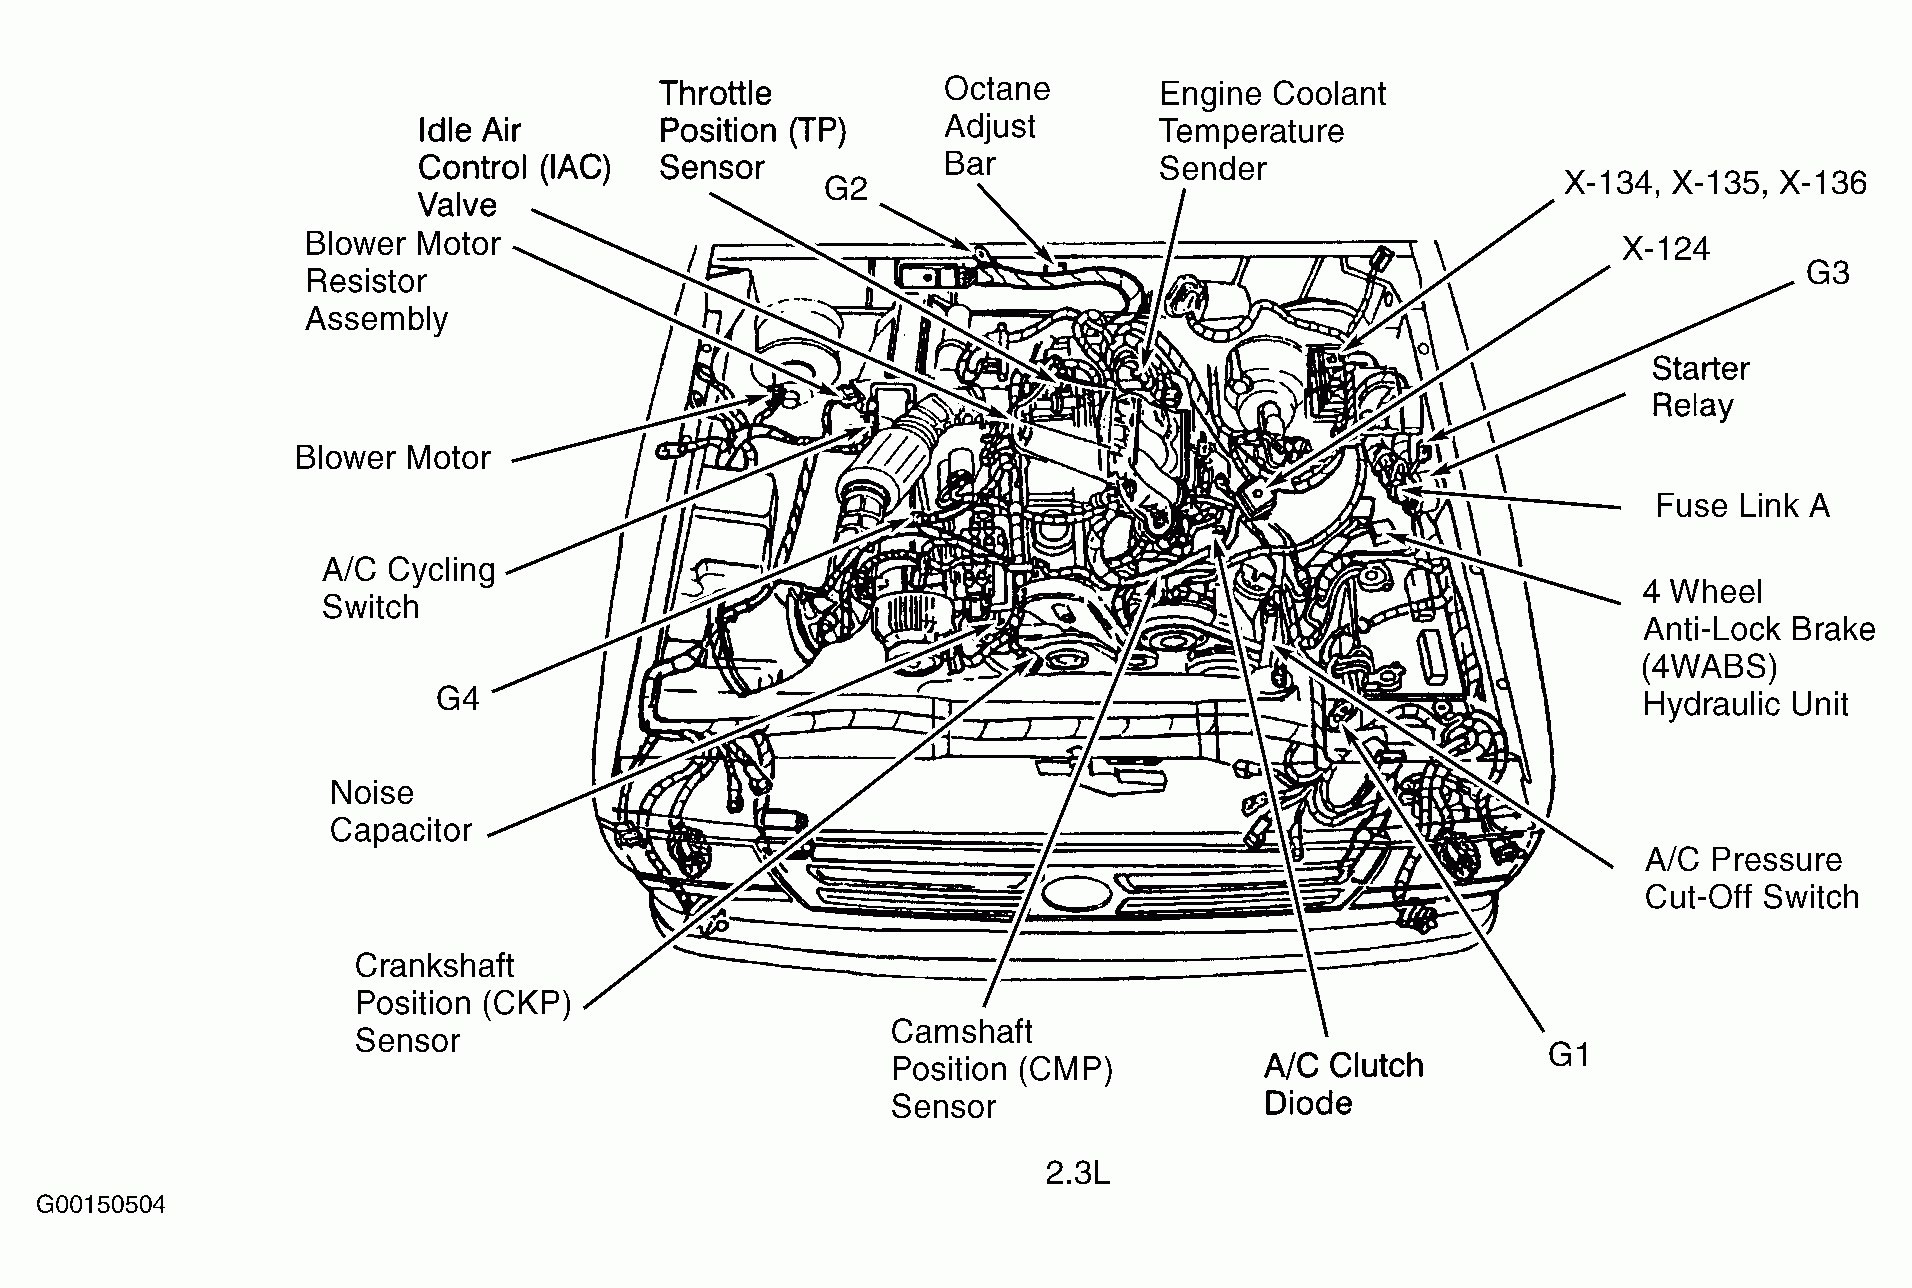 1994 ford Ranger Engine Diagram 1995 Mazda B3000 Engine Diagram Simple Guide About Wiring Of 1994 ford Ranger Engine Diagram